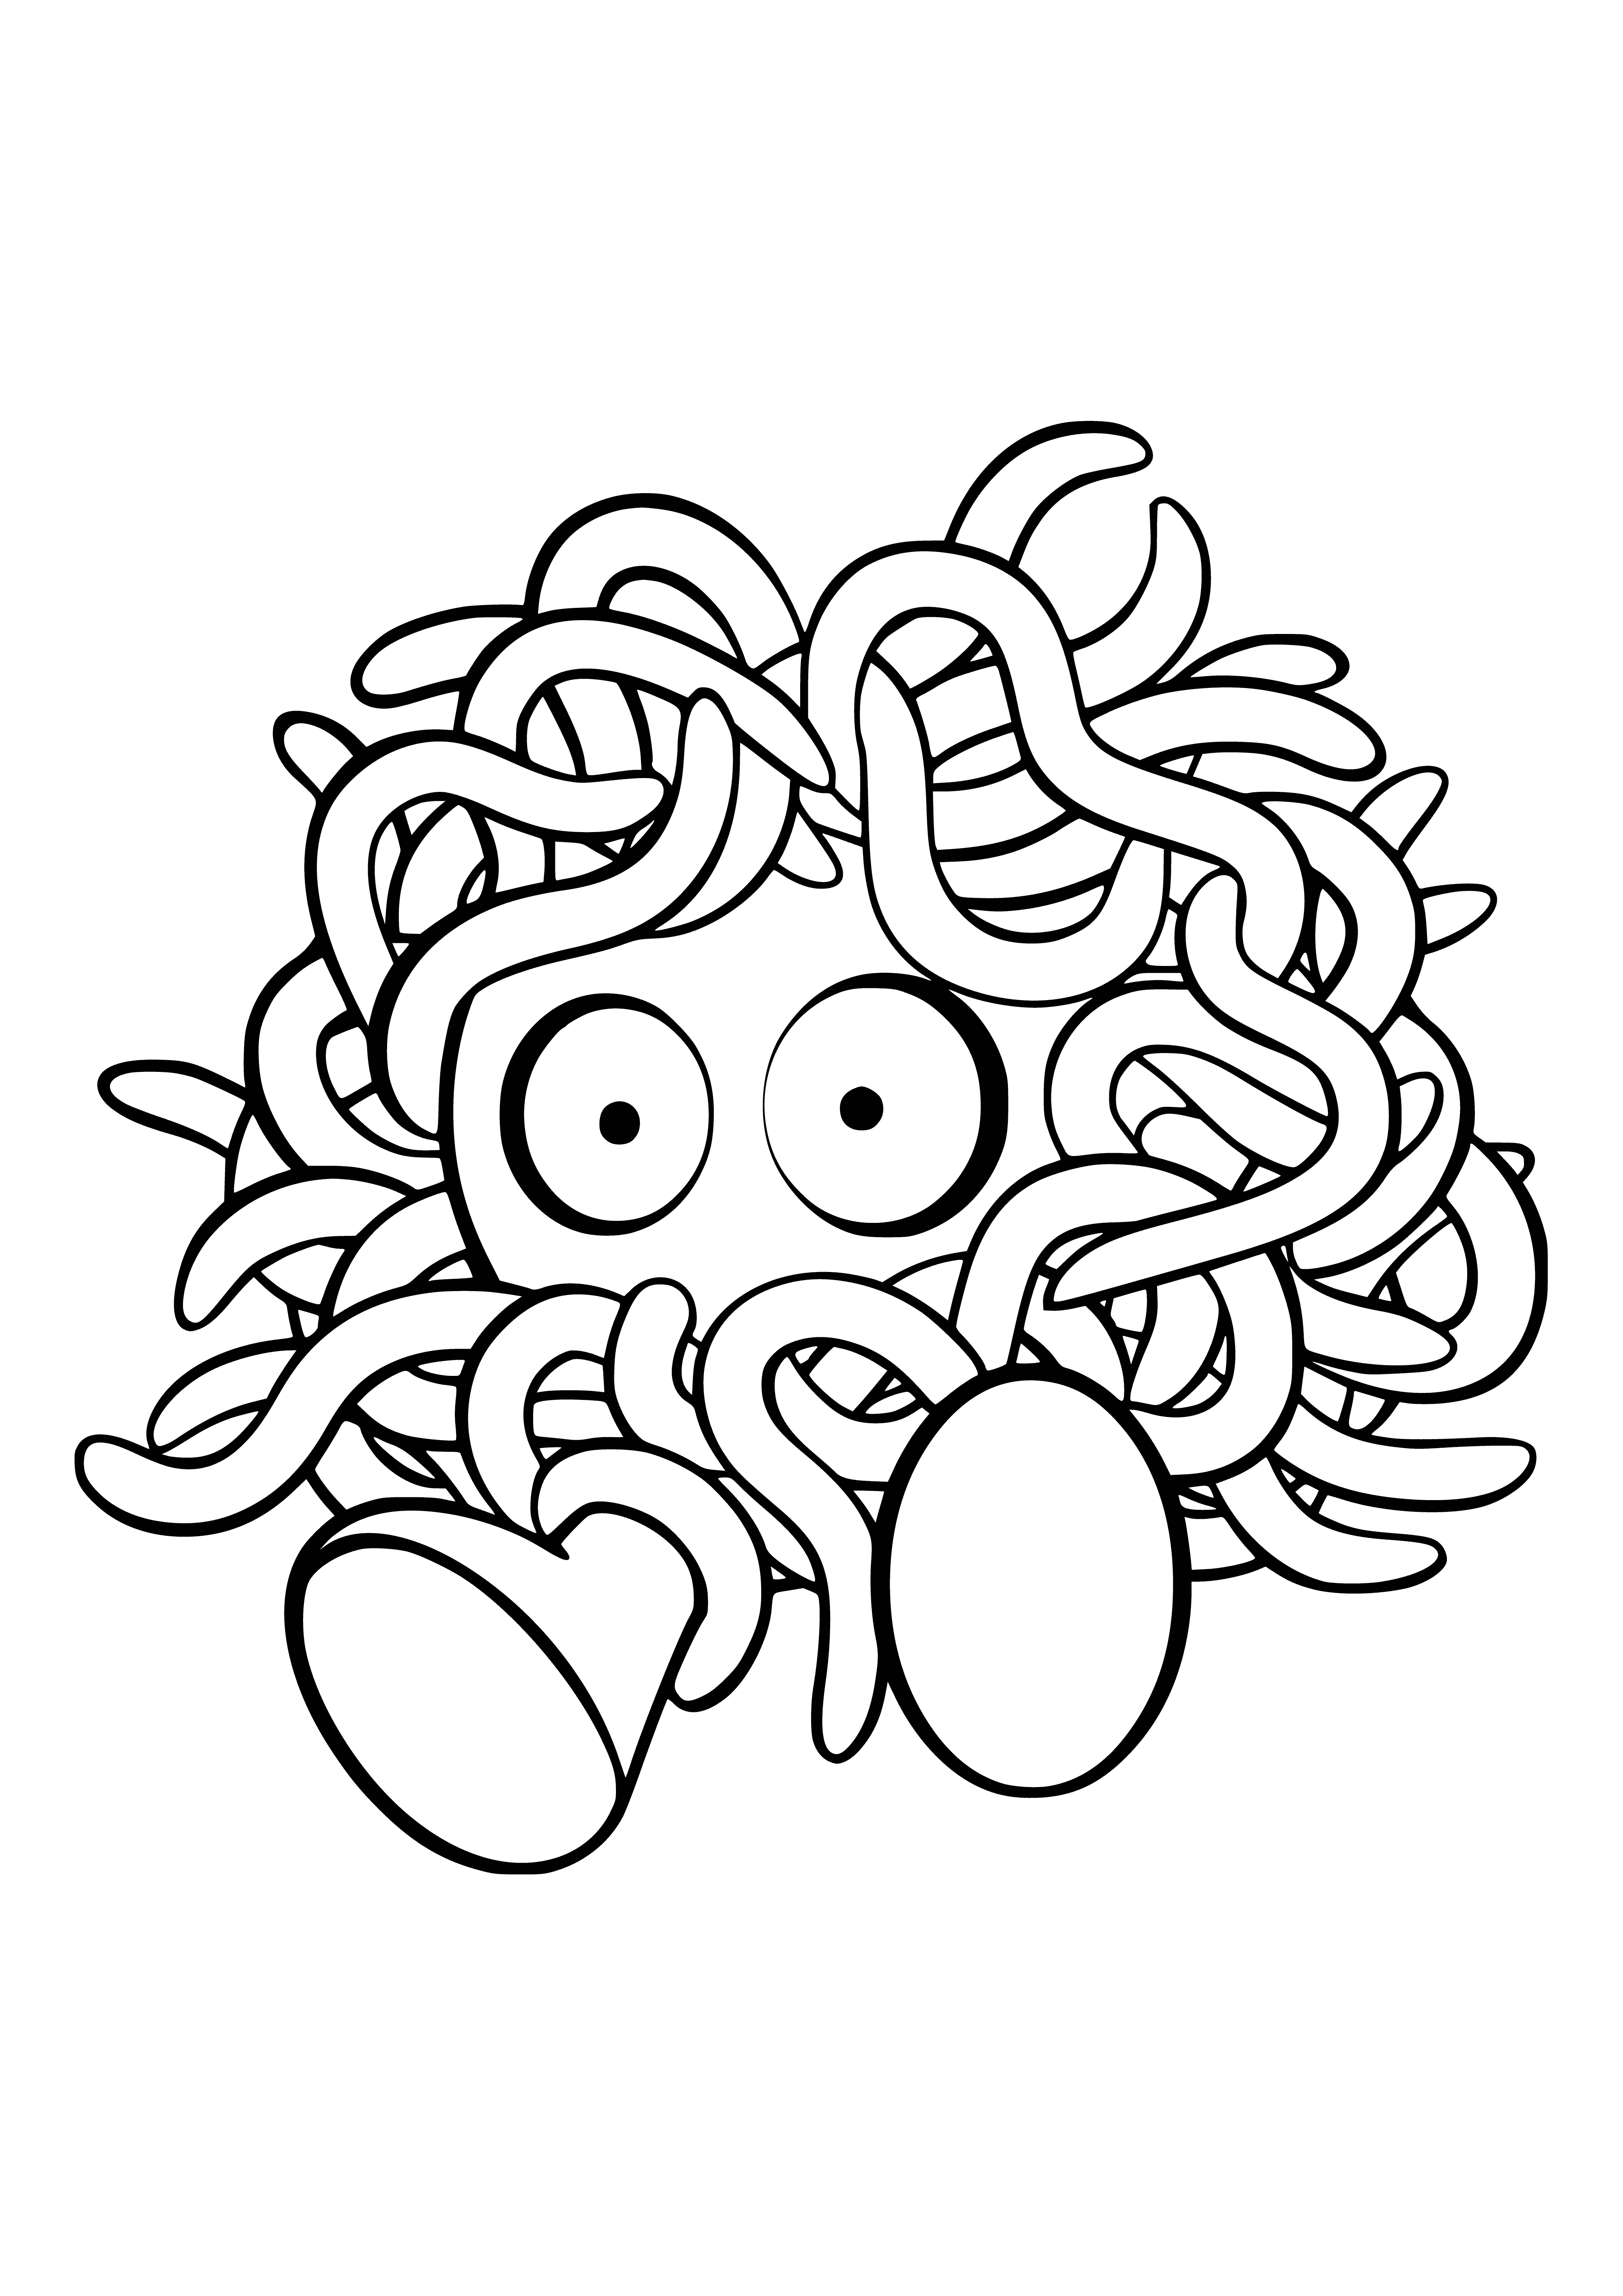 coloring page: Tangela is a peaceful, blue & amorphous Pokémon with prehensile vines that can create & strangle prey and emit a paralyzing fluid.